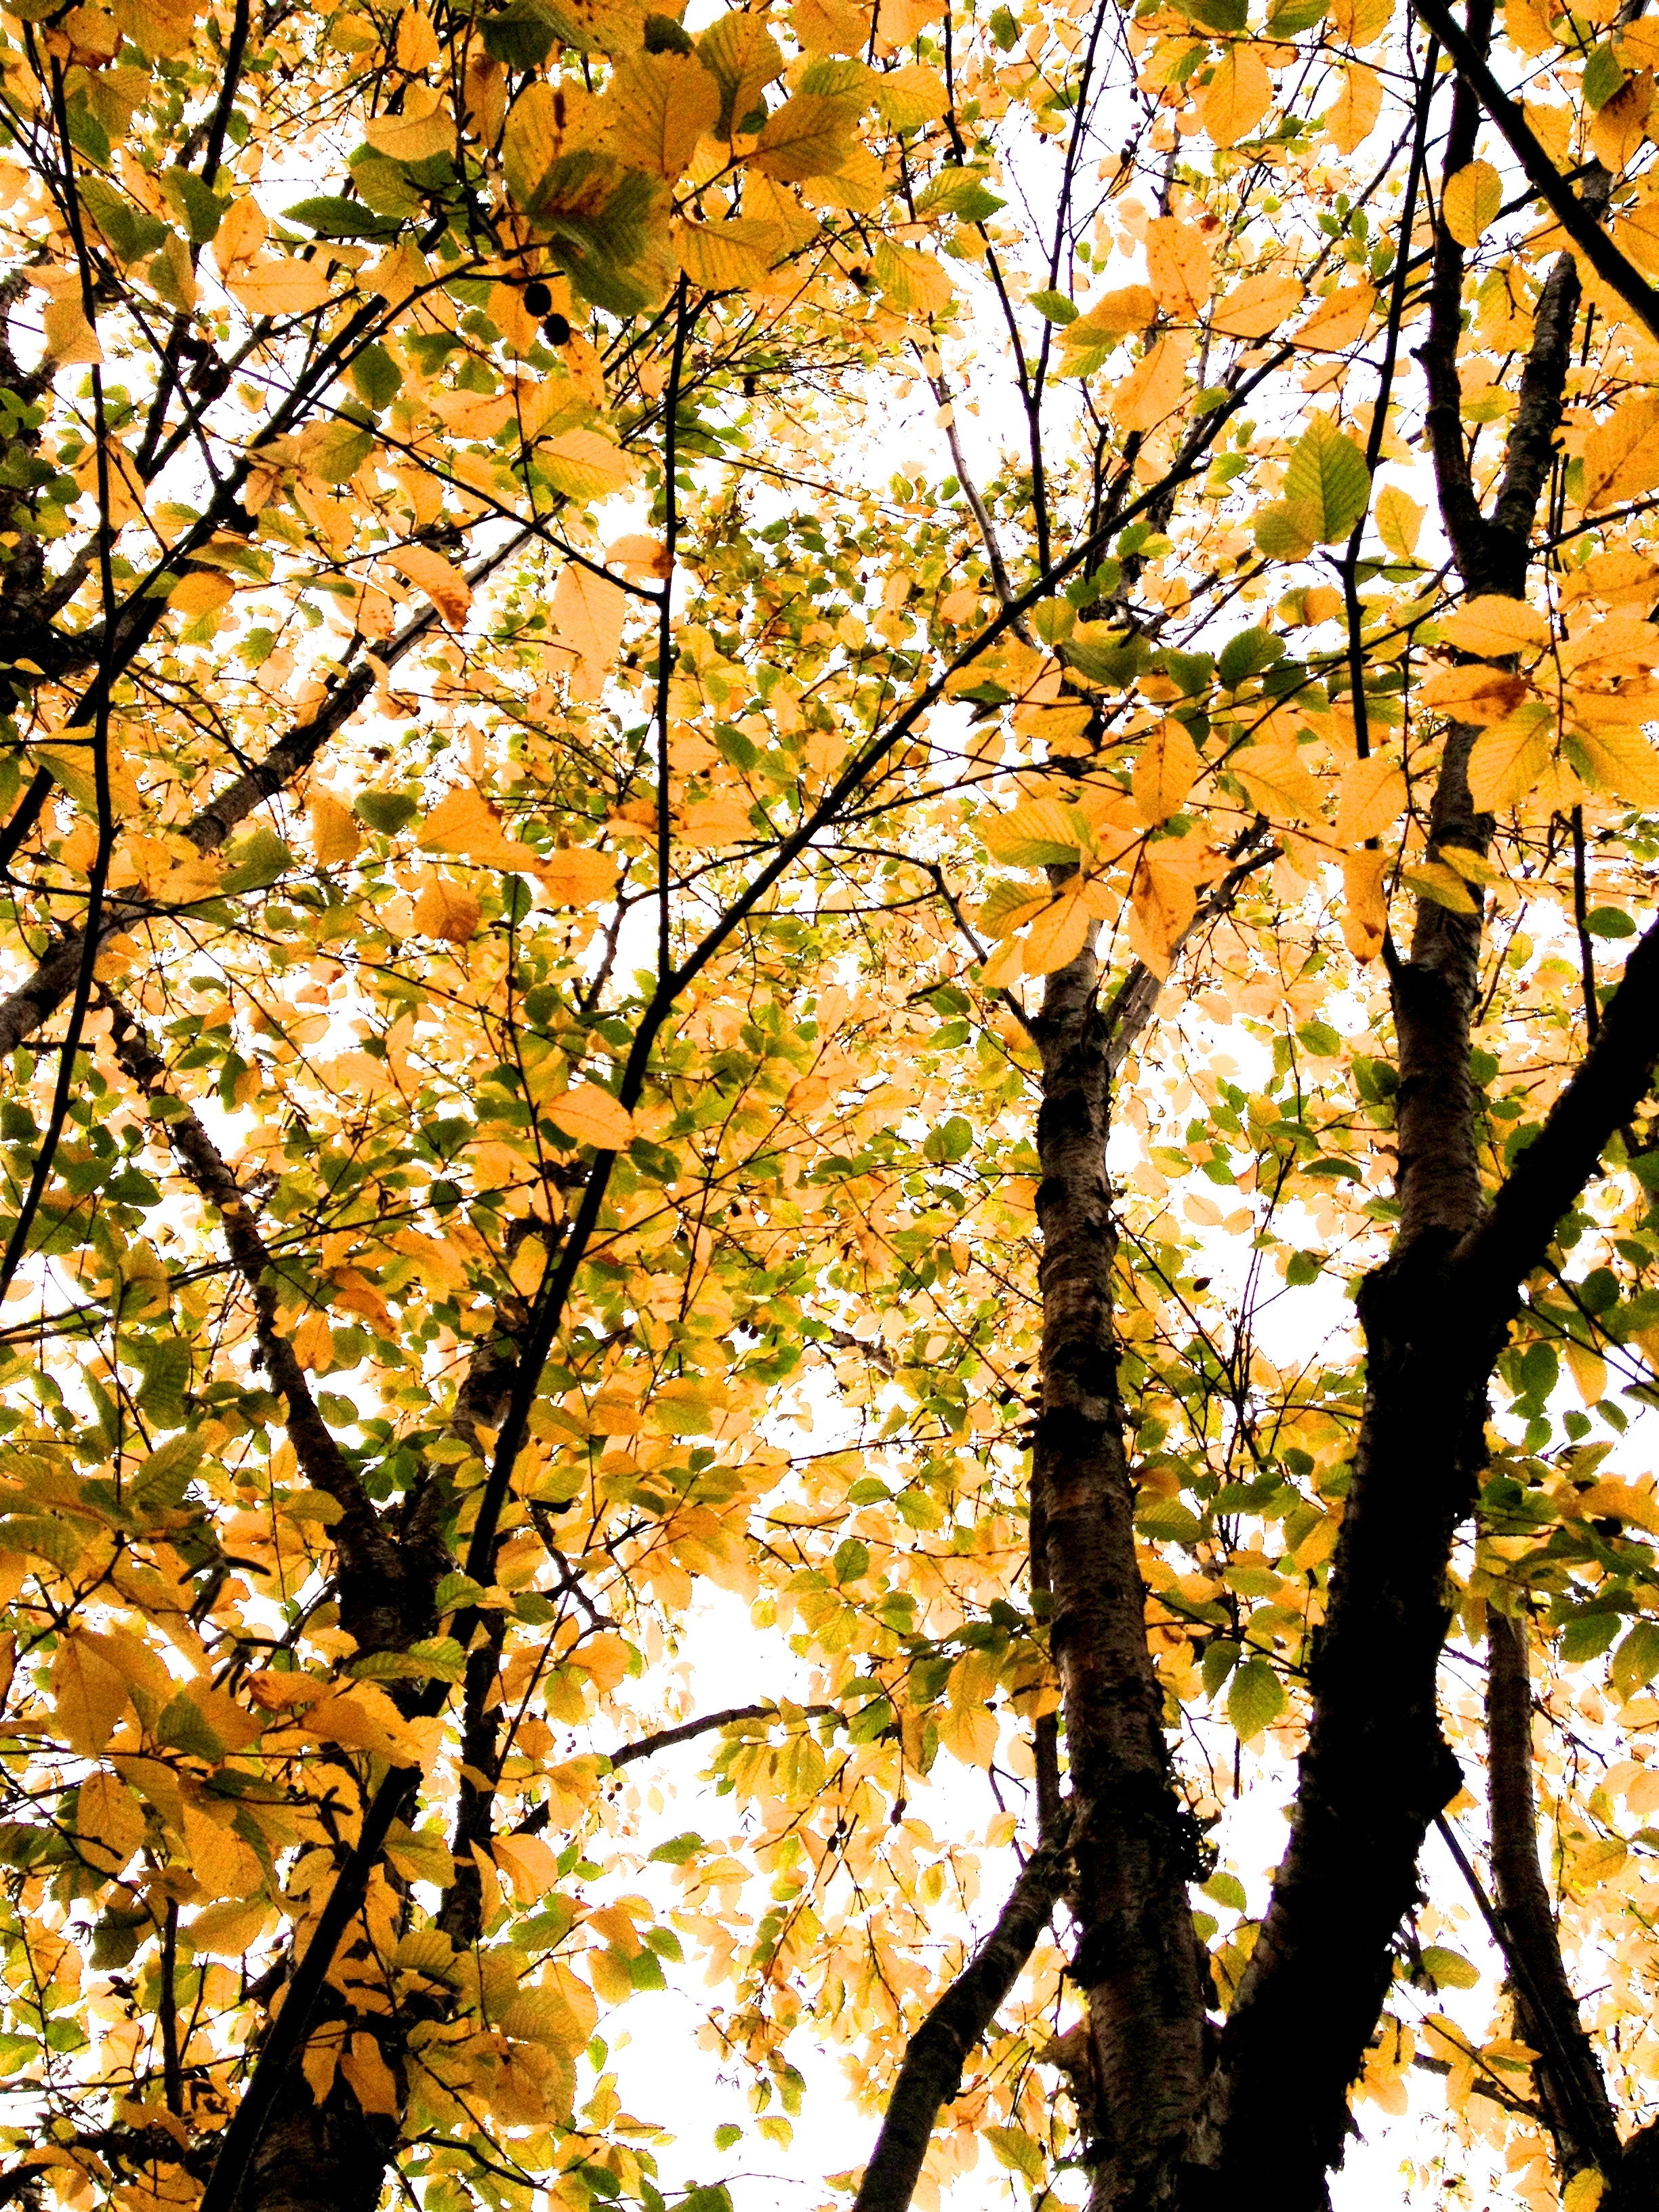 Yellow leaves of yellow birches.